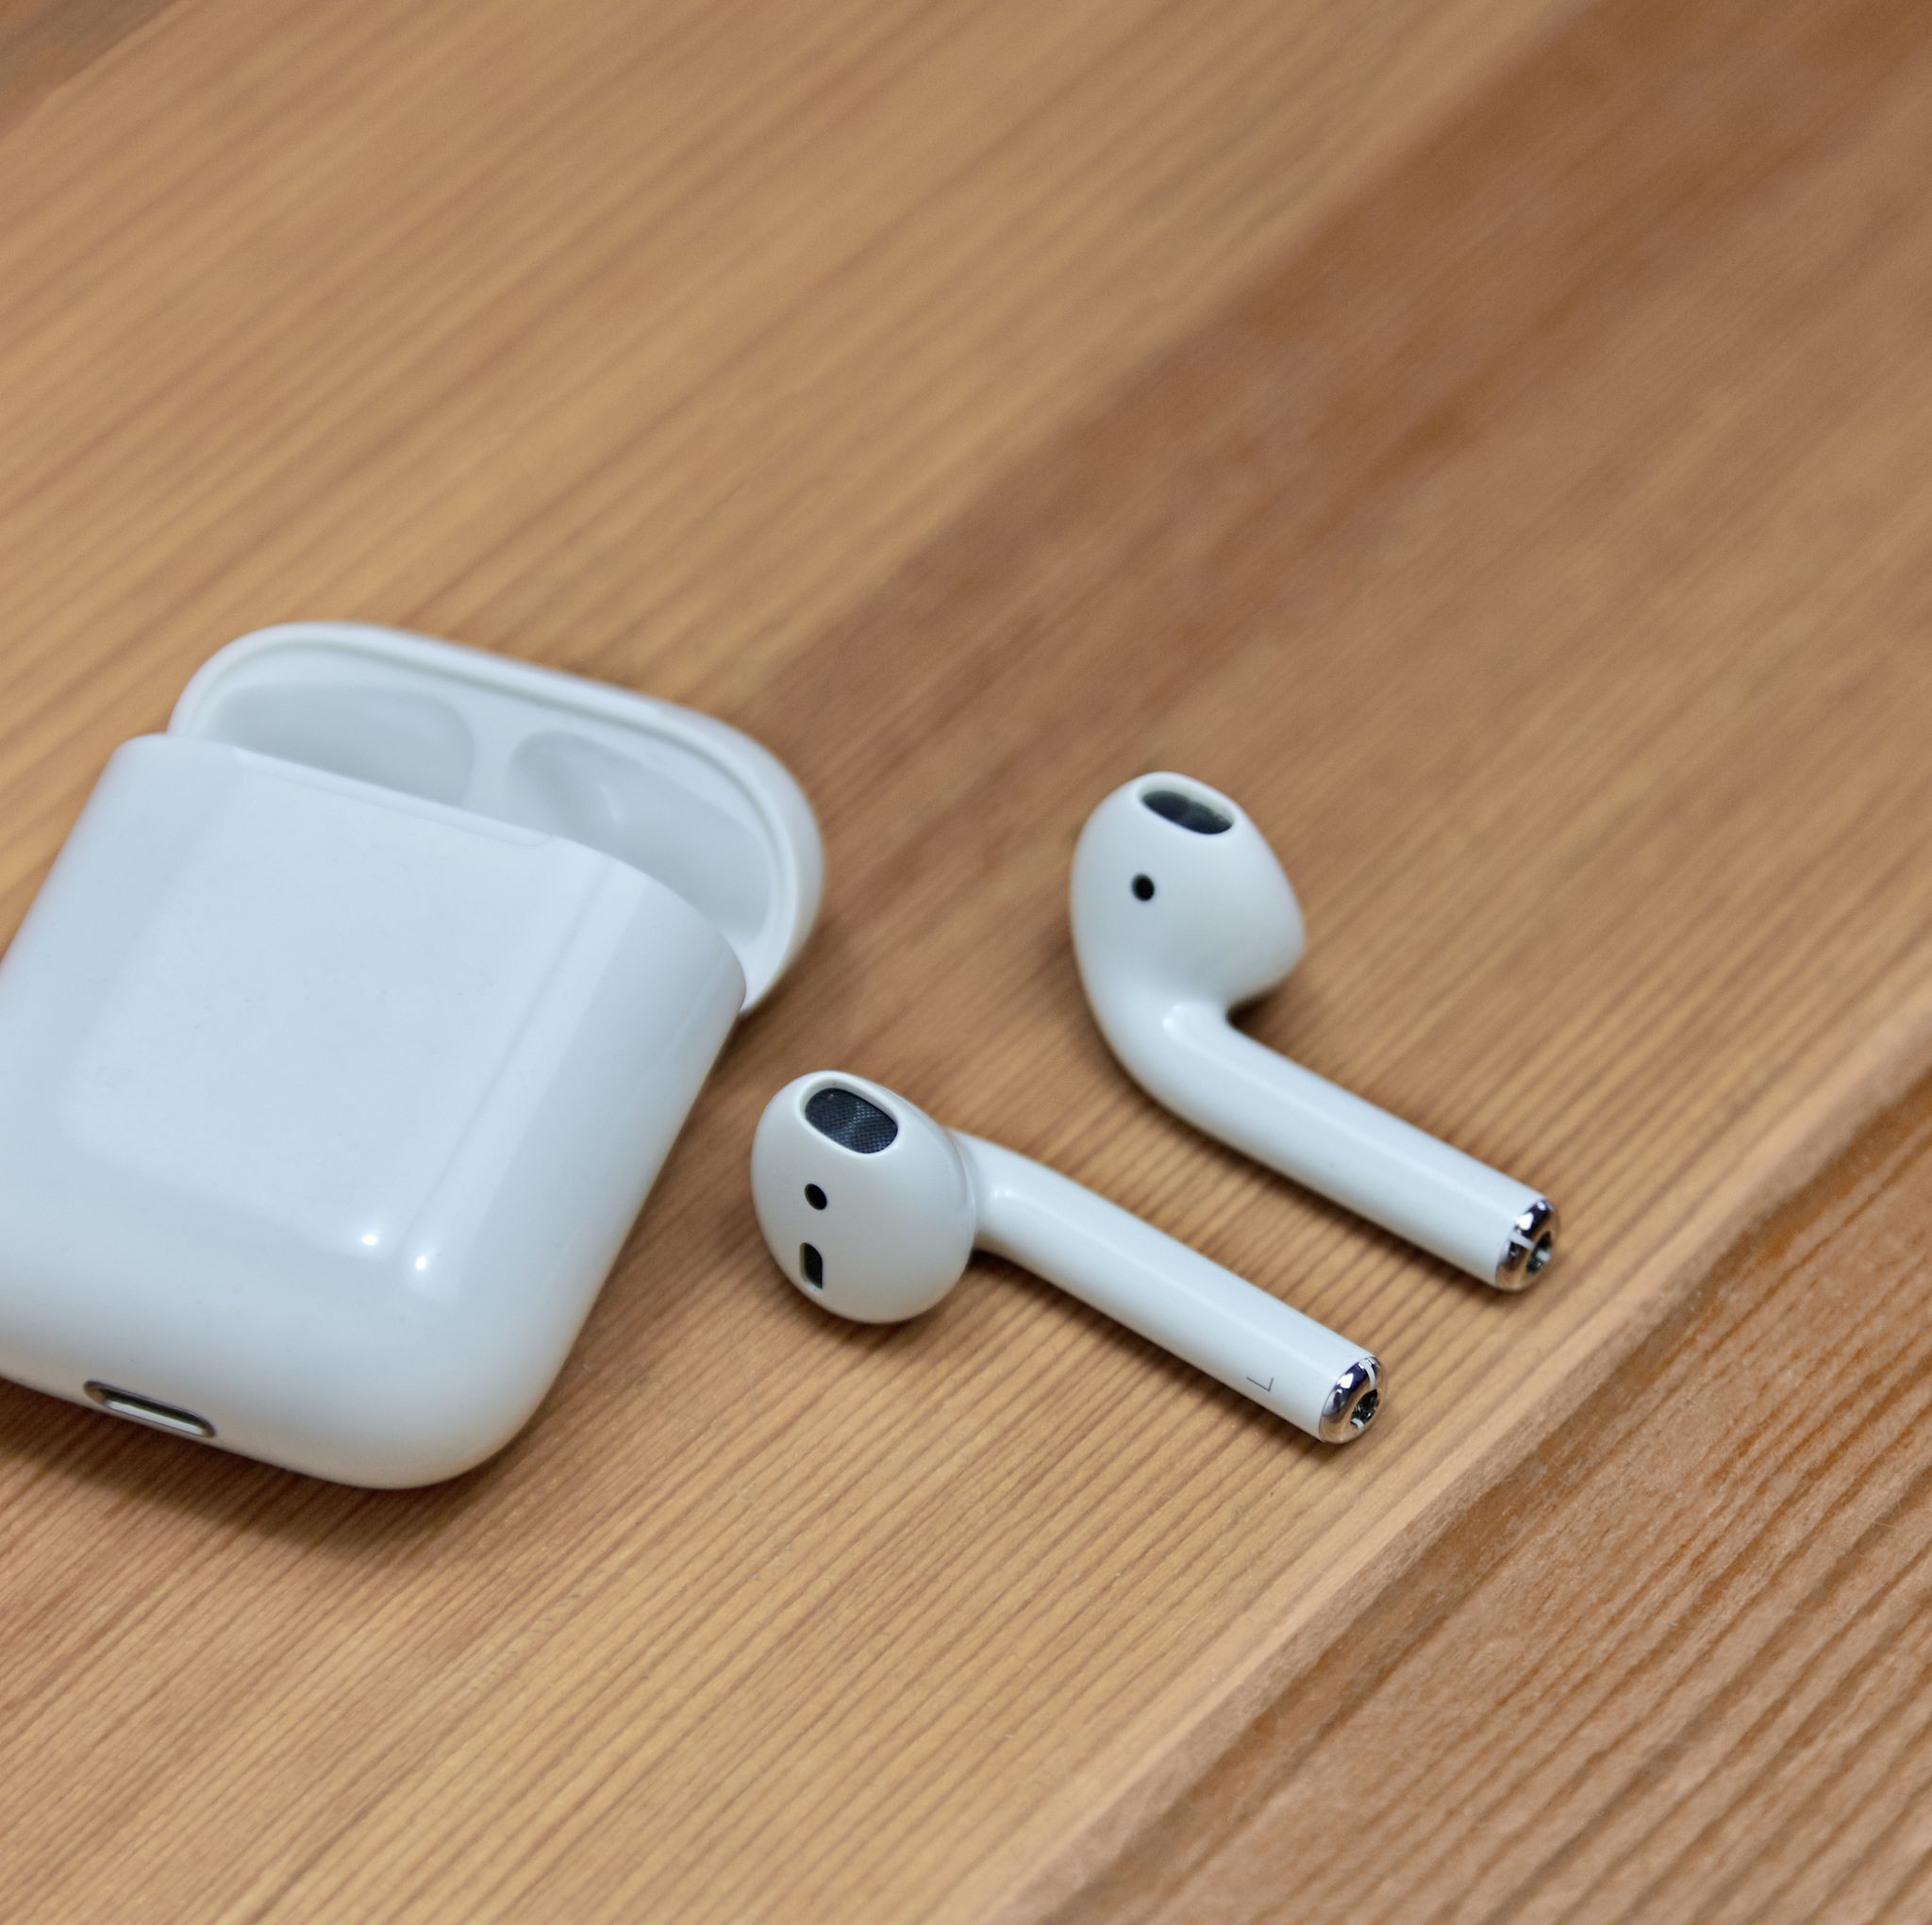 These Apple Airpod lookalikes are 78% reduced